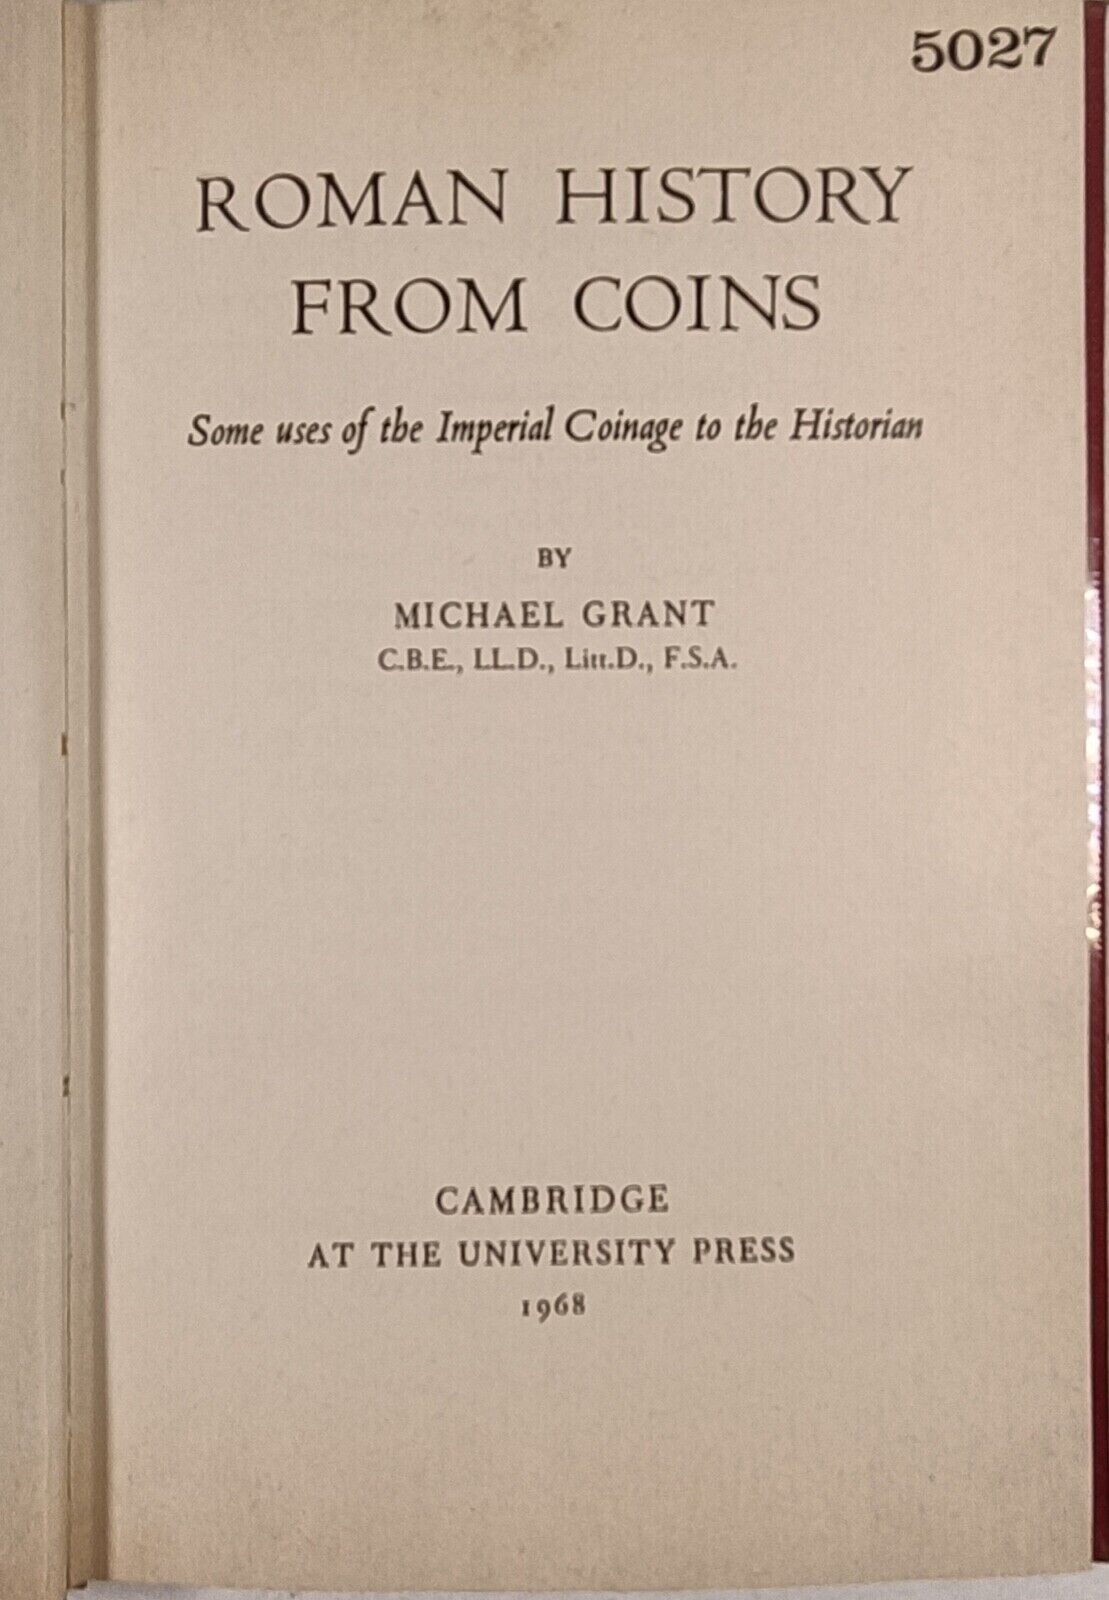 NUMISMATICA: ROMAN HISTORY FROM COINS - MICHAEL GRANT - 1968 …